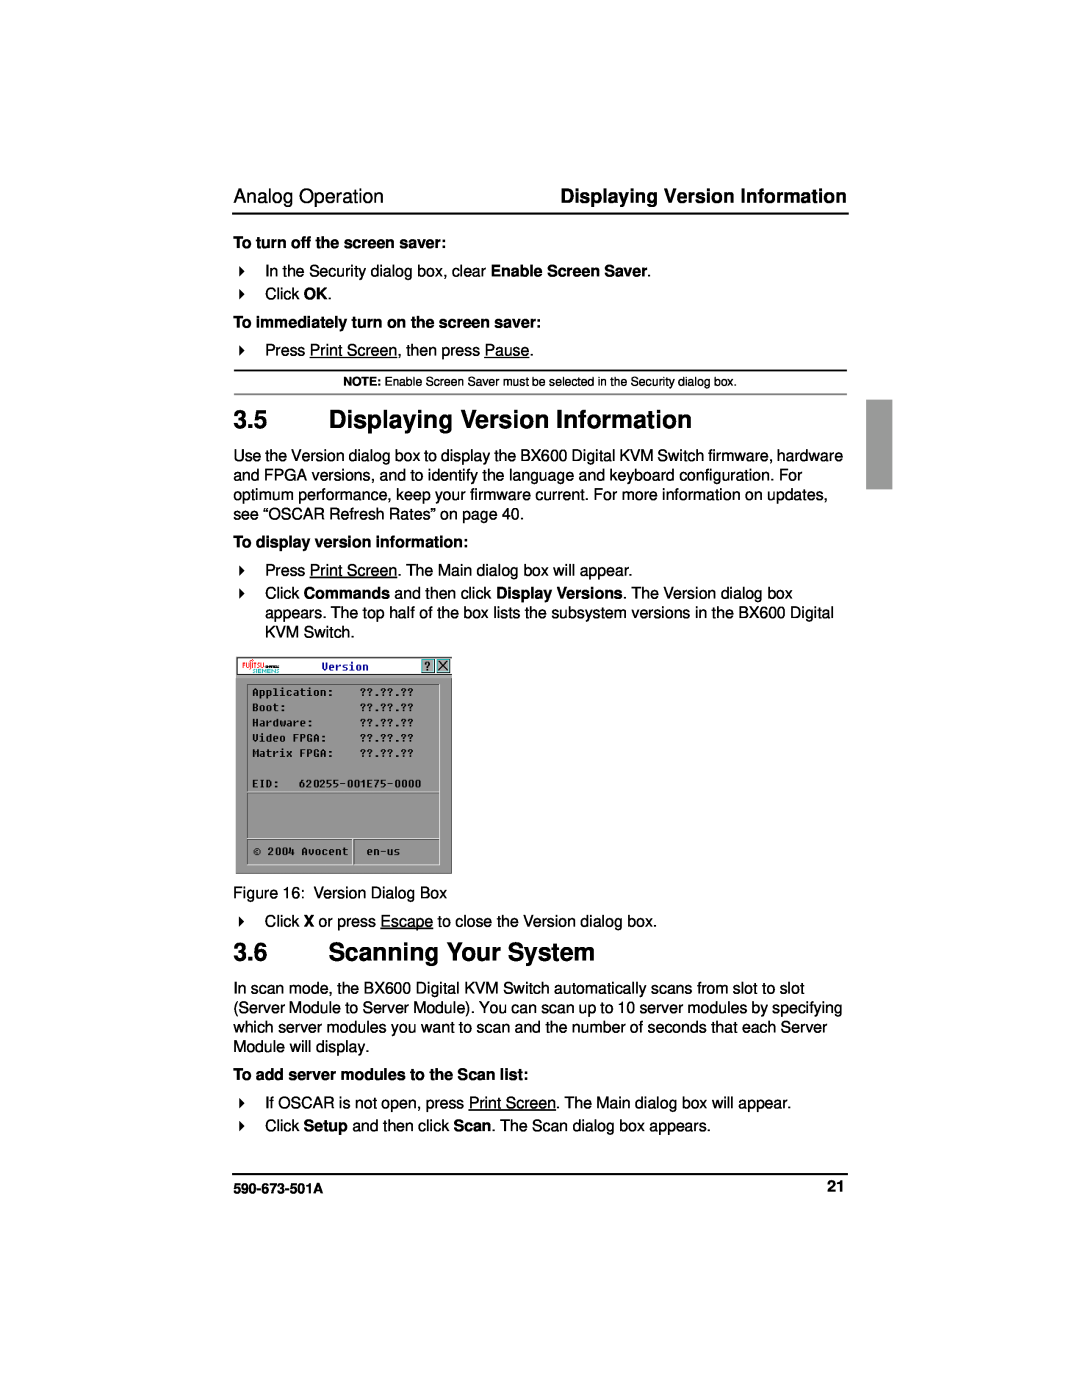 Fujitsu Siemens Computers BX600 manual Displaying Version Information, Scanning Your System, To turn off the screen saver 